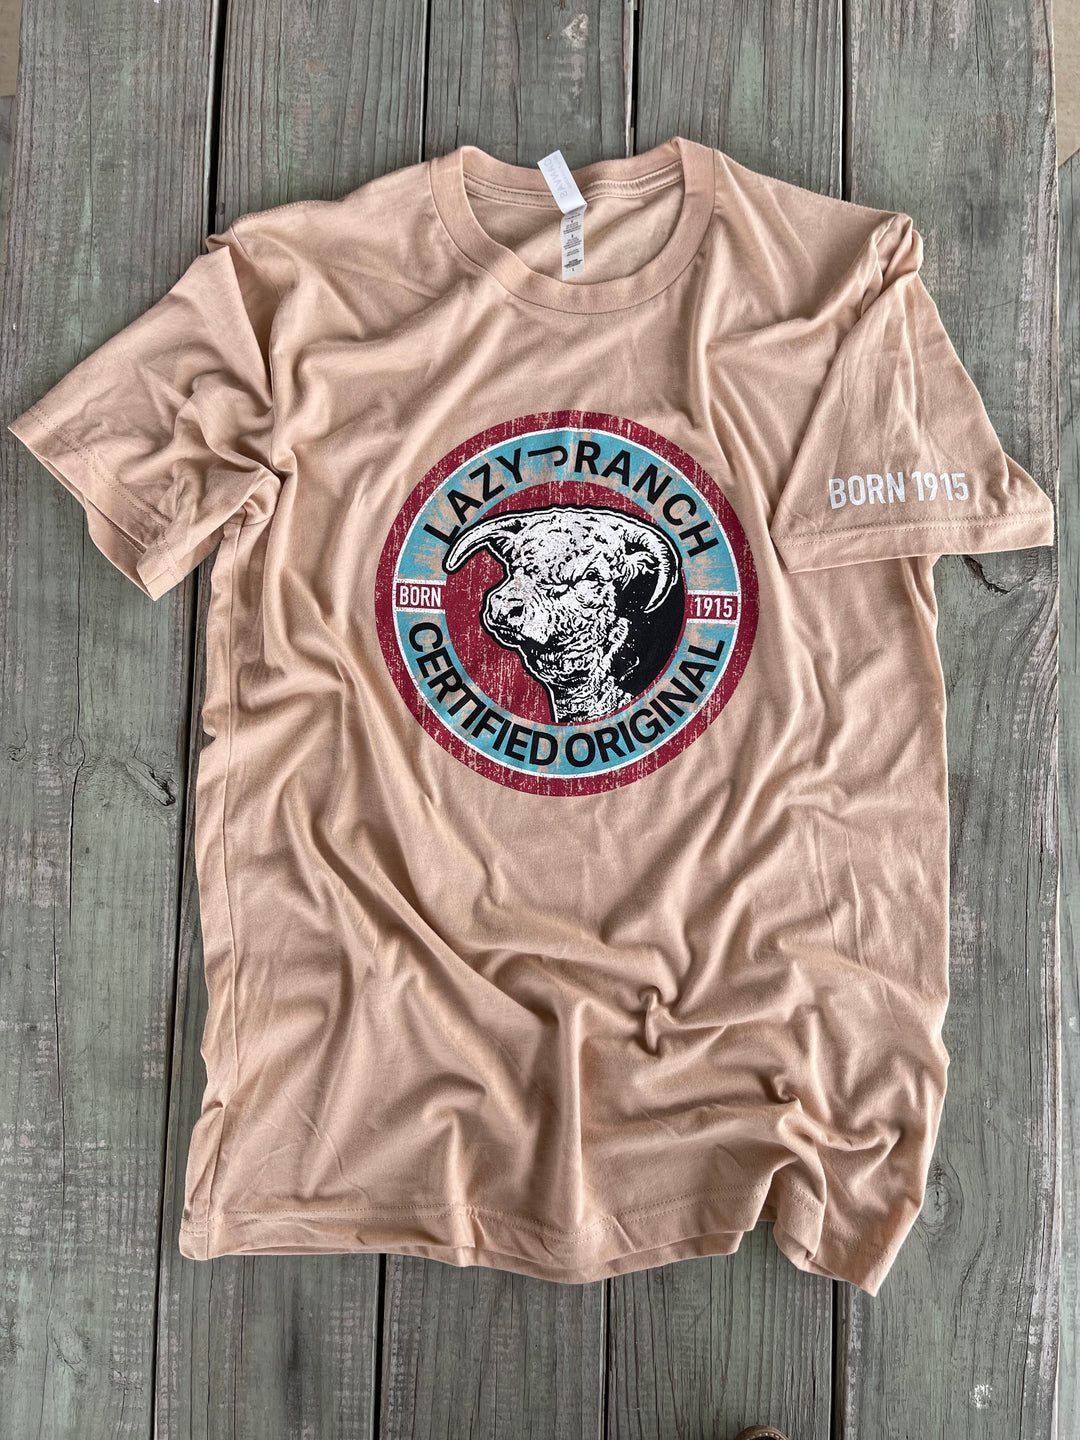 Lazy J Ranch Wear Certified Original Hereford T-Shirt - Heather Sand